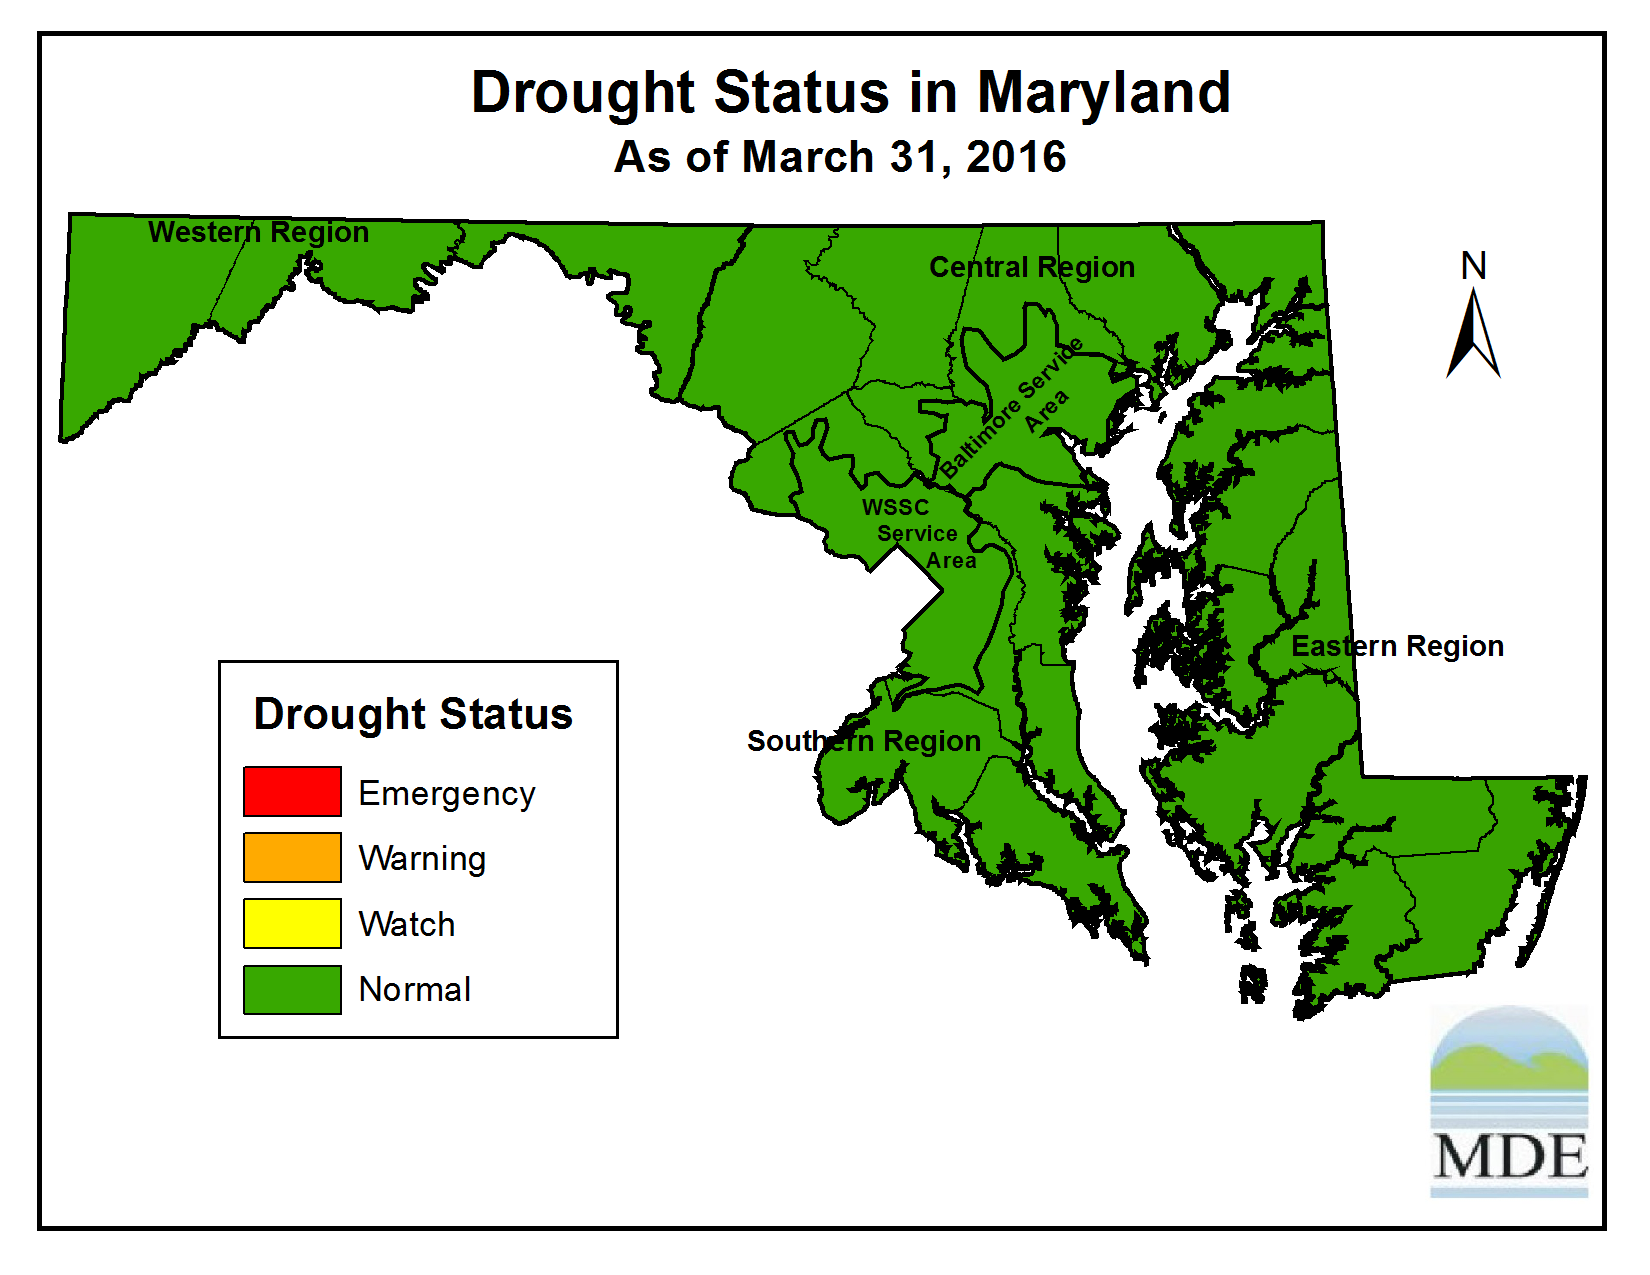 Drought Status as of March 31, 2016